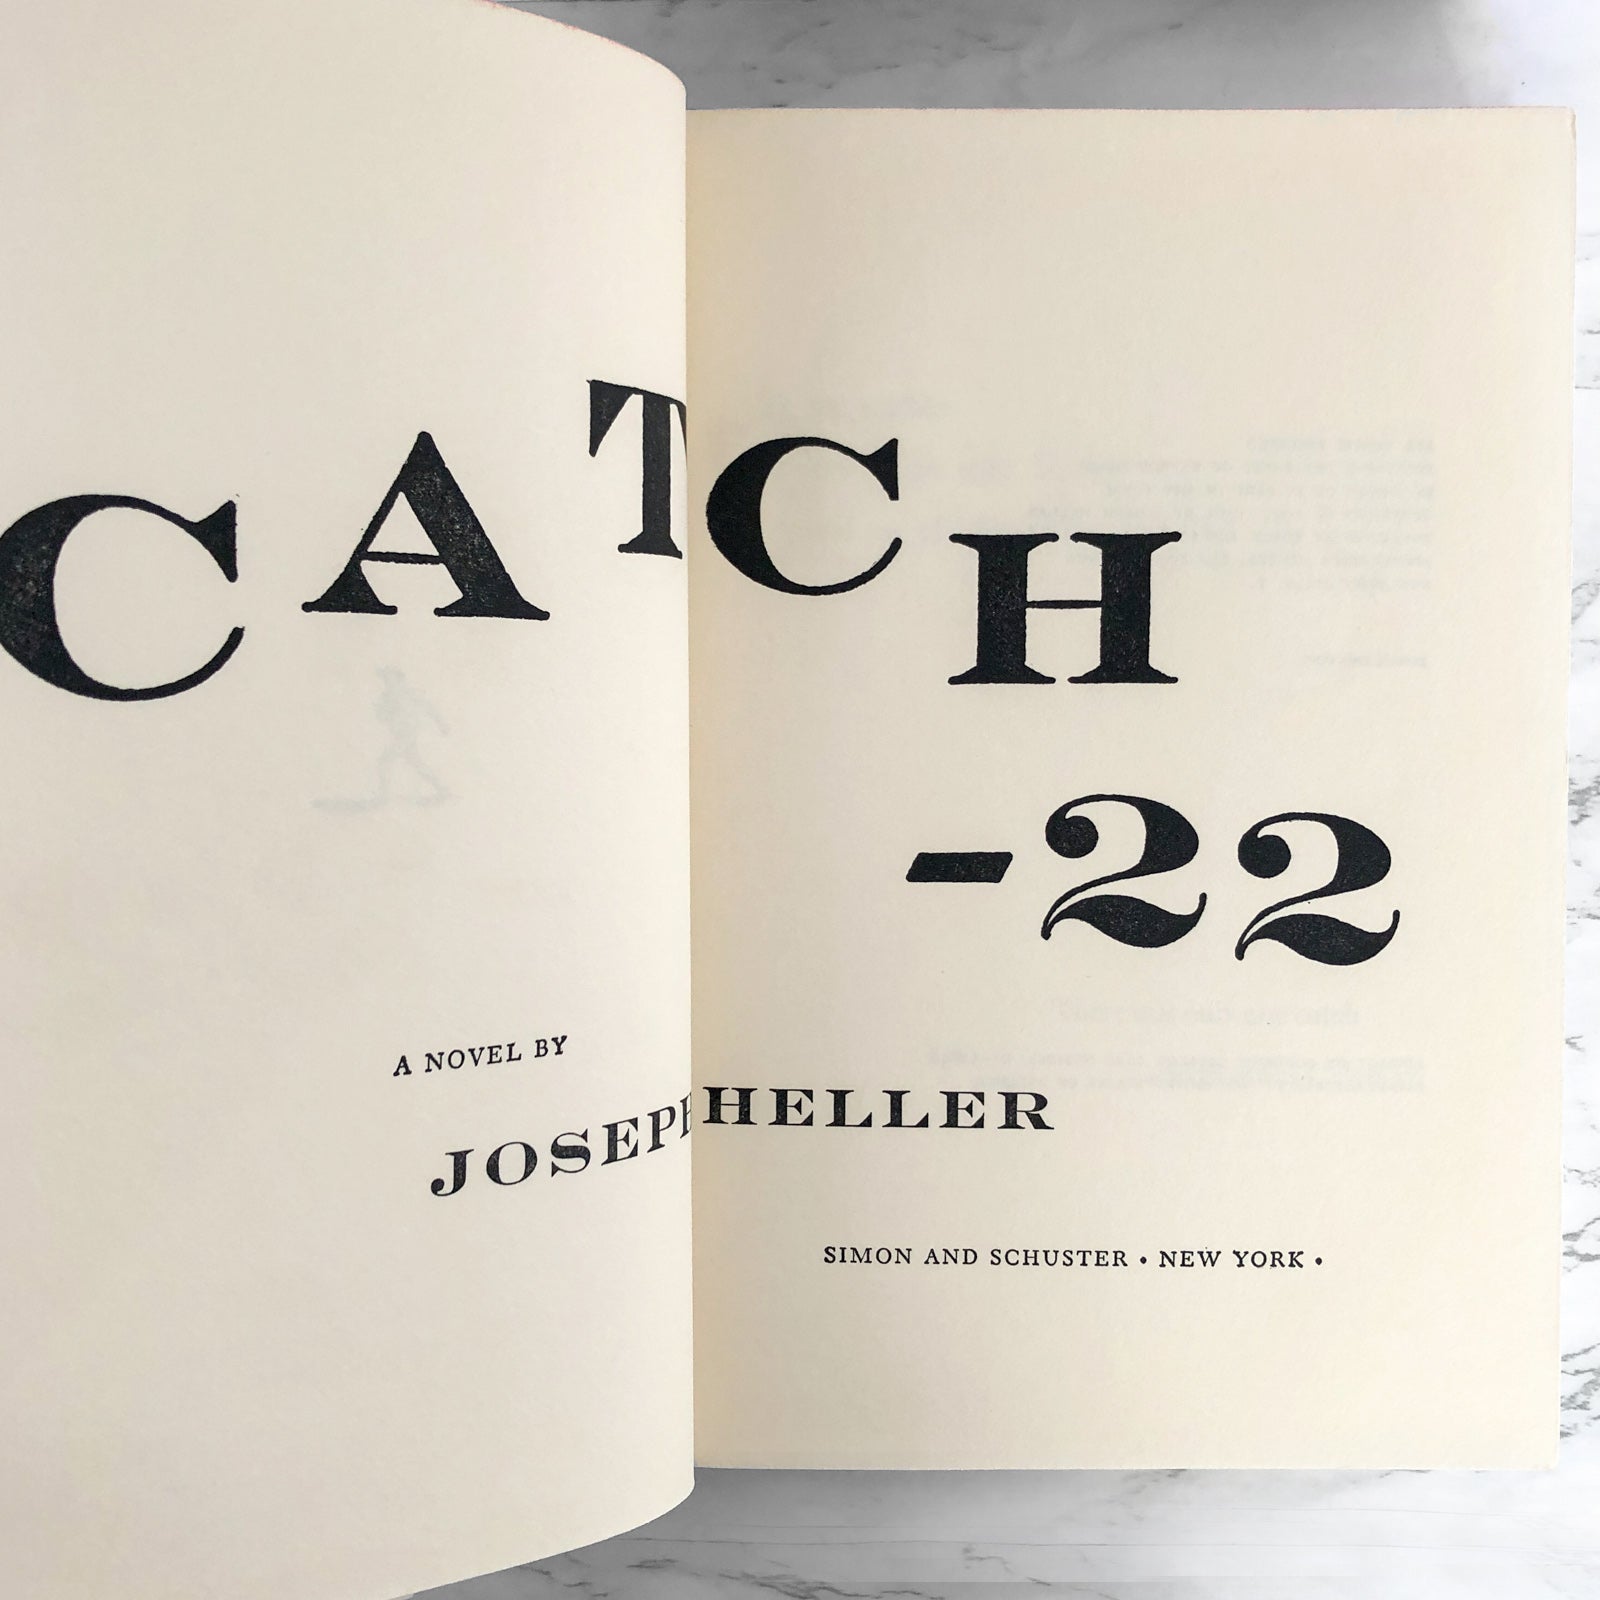 Catch-22 by Joseph Heller [FIRST EDITION / TENTH PRINTING] 1961